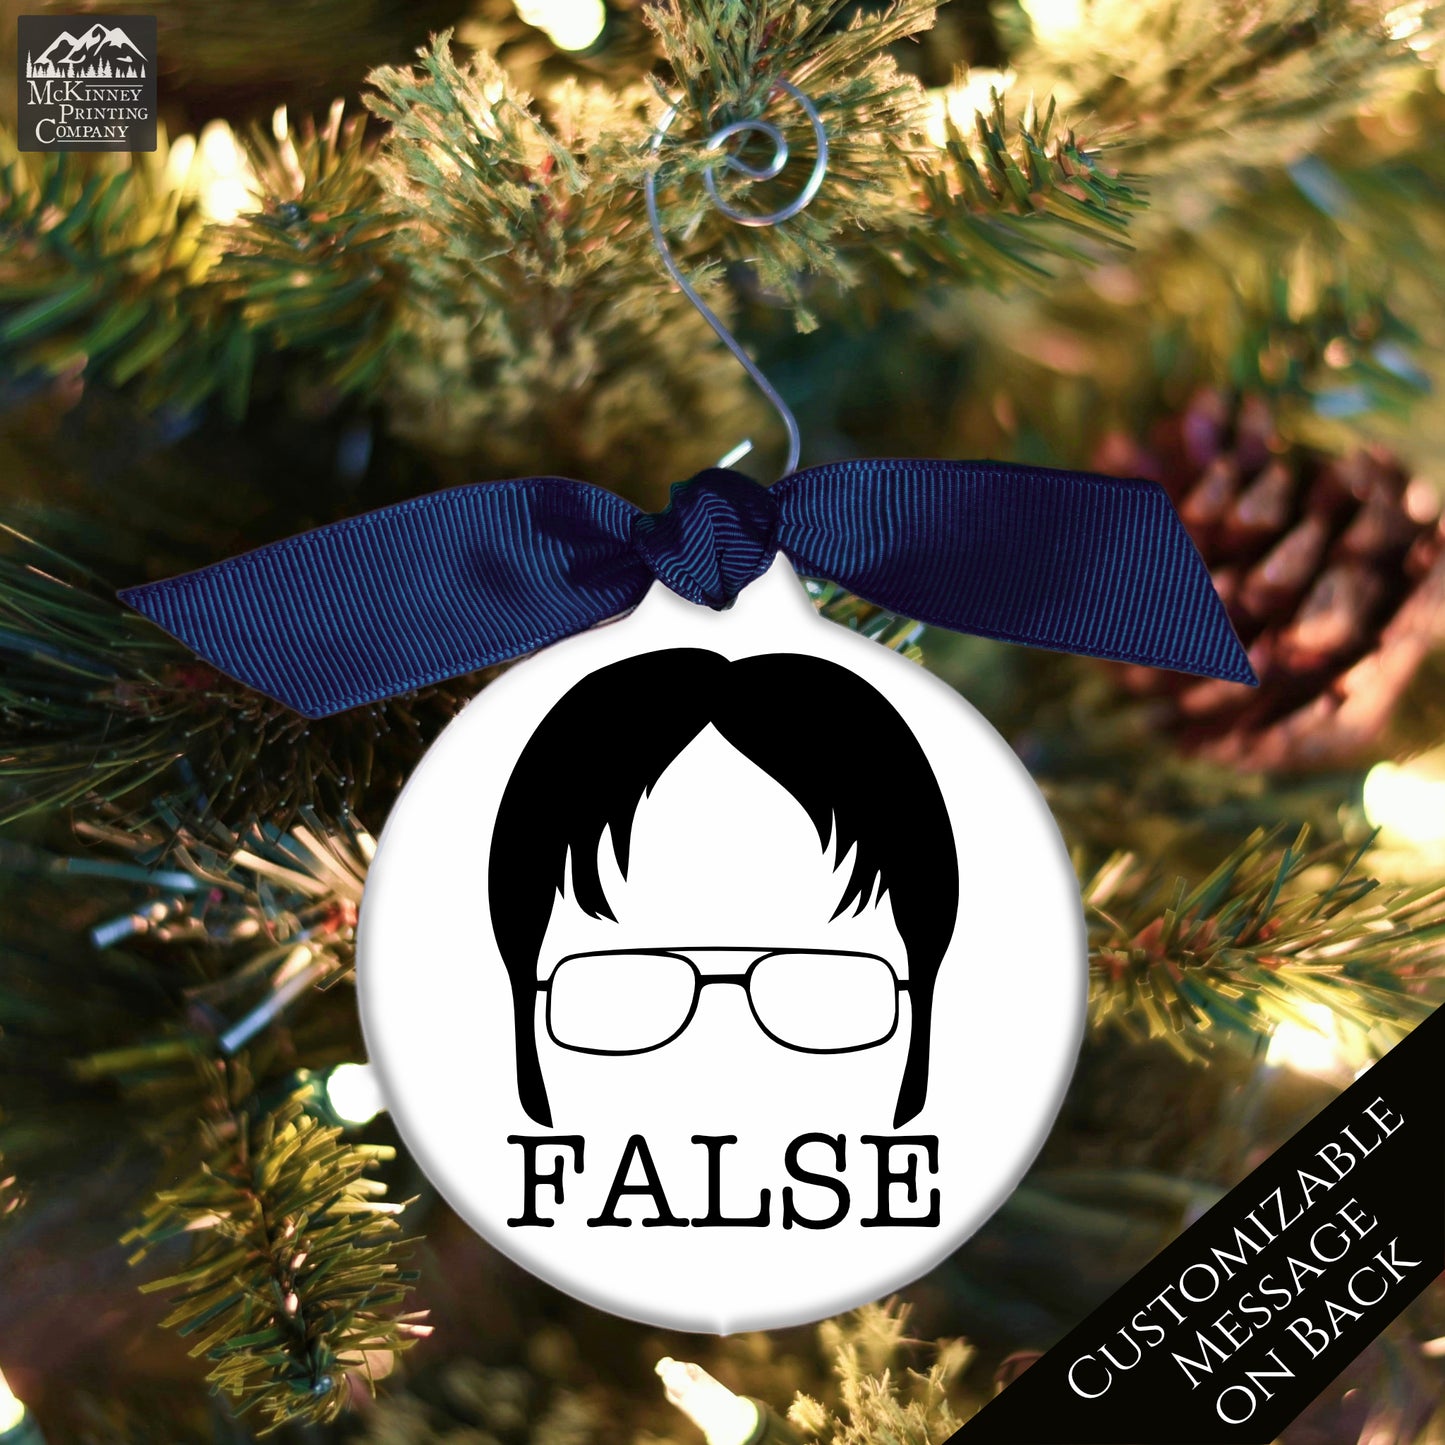 The Office TV Show - Christmas Ornament, Dwight Schrute, False, Quote